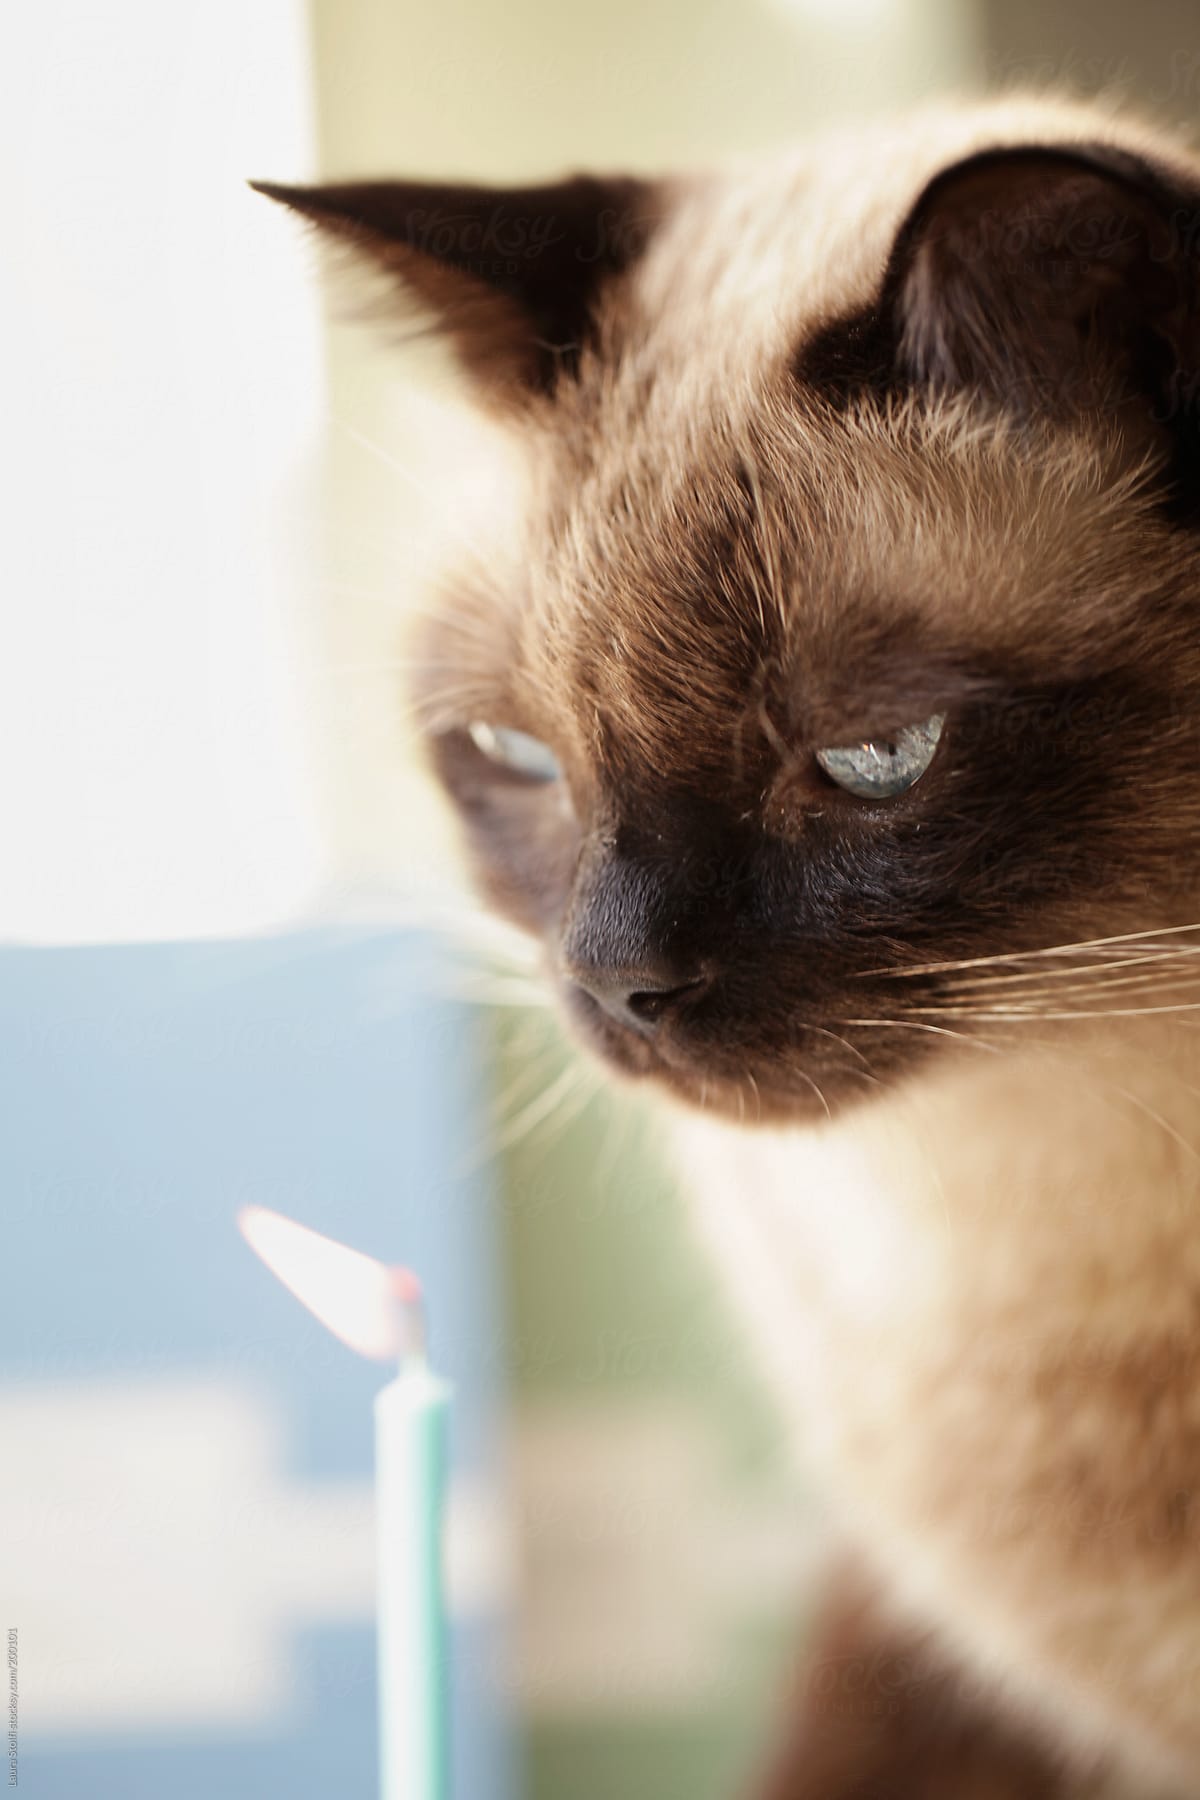 Make a wish: handsome cat in front of burning pale blue birthday candle